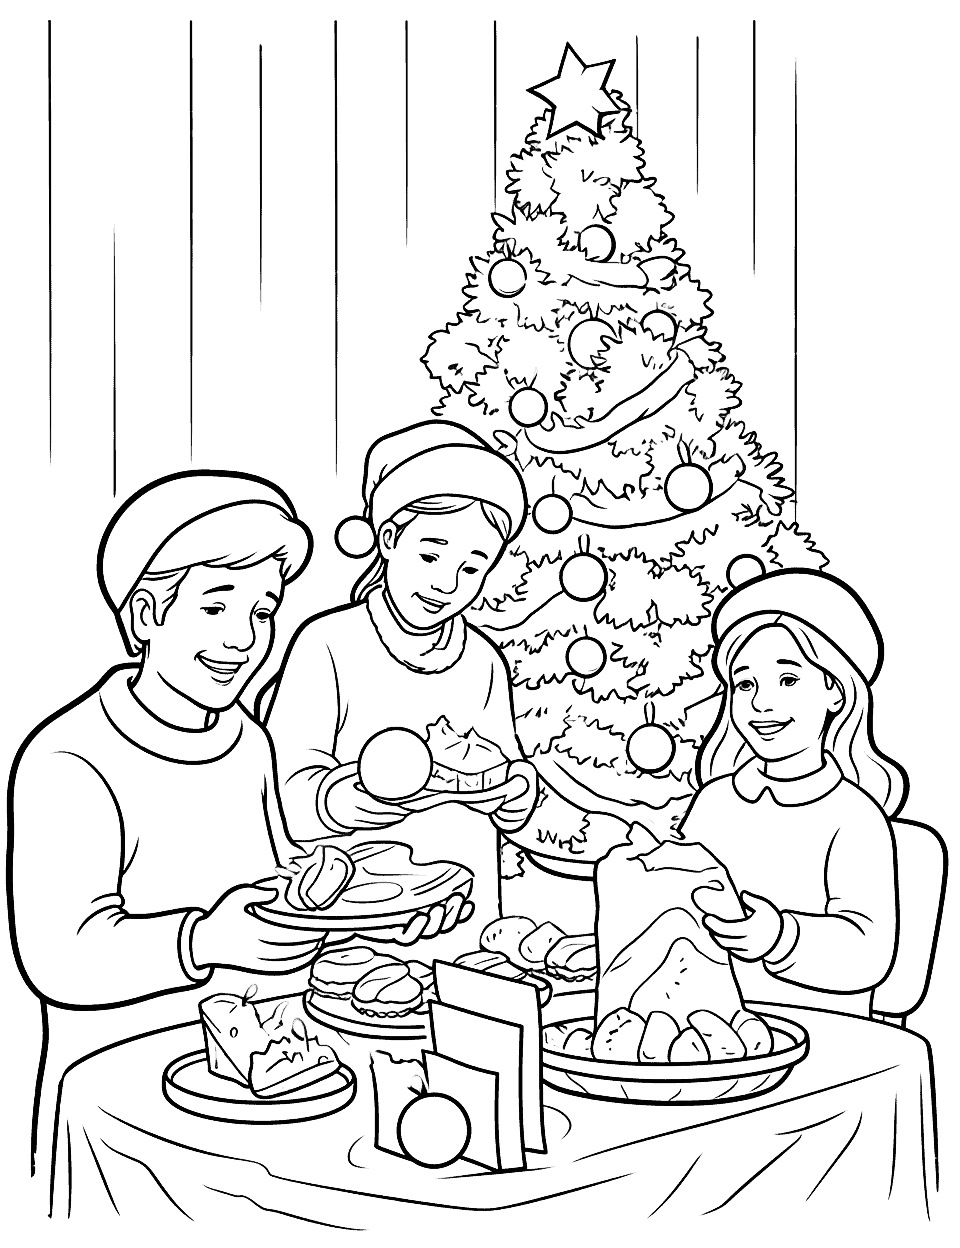 Christmas Breakfast Coloring Page - A family enjoying a hearty Christmas breakfast with pancakes and hot cocoa.